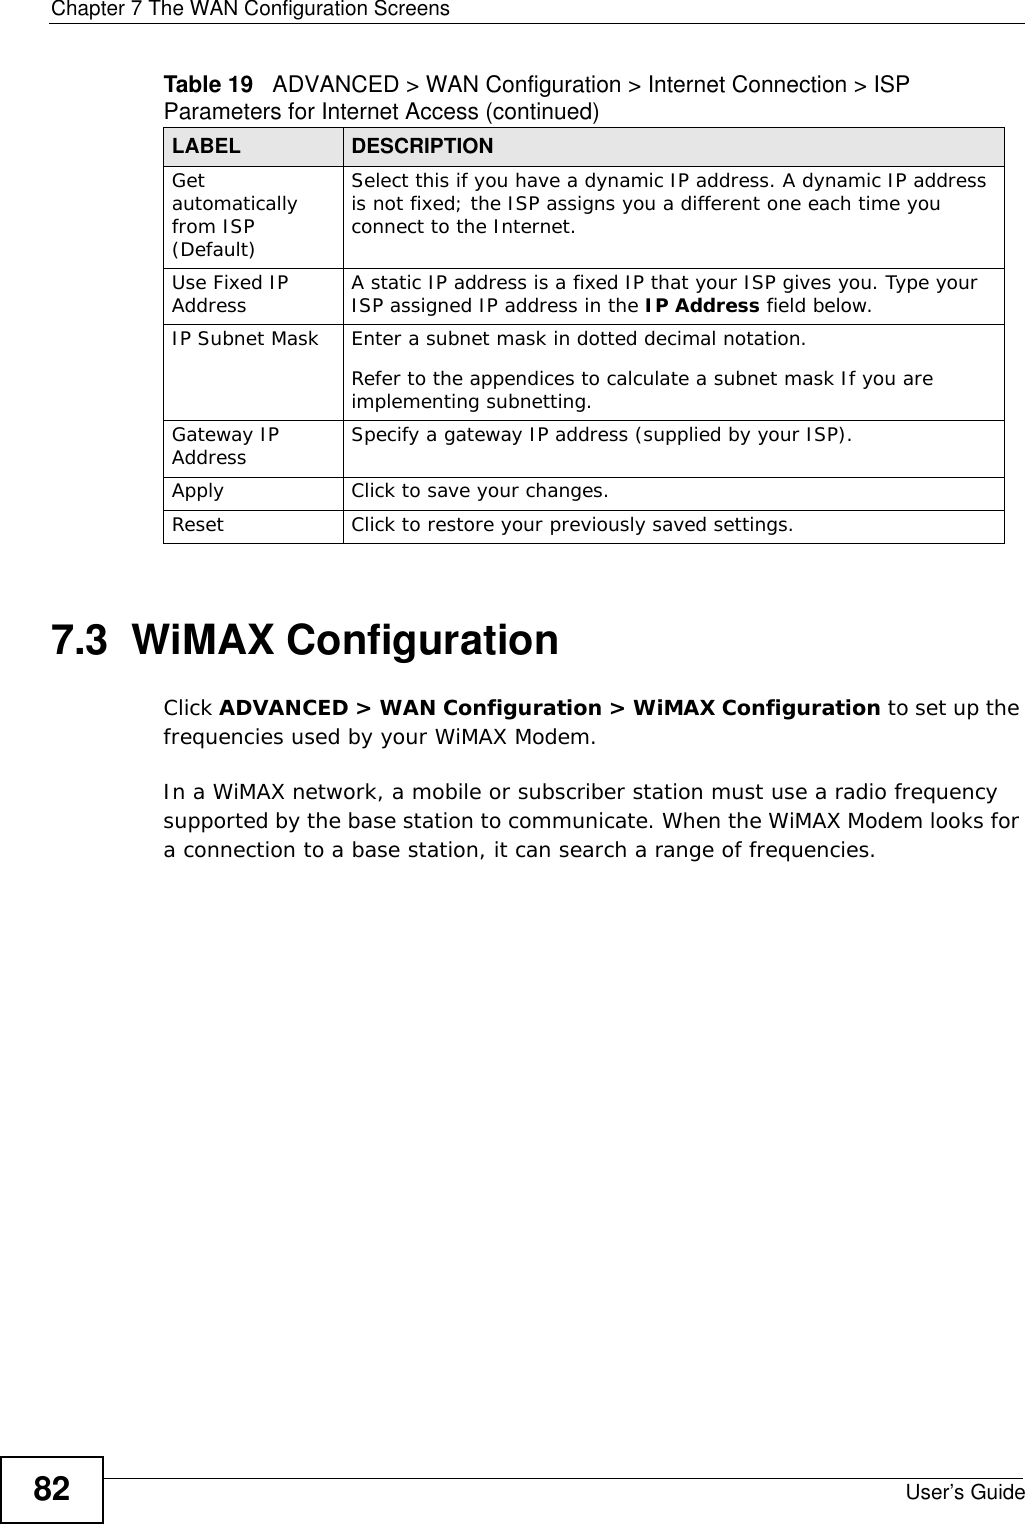 Chapter 7 The WAN Configuration ScreensUser’s Guide827.3  WiMAX ConfigurationClick ADVANCED &gt; WAN Configuration &gt; WiMAX Configuration to set up the frequencies used by your WiMAX Modem.In a WiMAX network, a mobile or subscriber station must use a radio frequency supported by the base station to communicate. When the WiMAX Modem looks for a connection to a base station, it can search a range of frequencies.Get automatically from ISP (Default)Select this if you have a dynamic IP address. A dynamic IP address is not fixed; the ISP assigns you a different one each time you connect to the Internet. Use Fixed IP Address A static IP address is a fixed IP that your ISP gives you. Type your ISP assigned IP address in the IP Address field below. IP Subnet Mask Enter a subnet mask in dotted decimal notation. Refer to the appendices to calculate a subnet mask If you are implementing subnetting.Gateway IP Address Specify a gateway IP address (supplied by your ISP).Apply Click to save your changes.Reset Click to restore your previously saved settings.Table 19   ADVANCED &gt; WAN Configuration &gt; Internet Connection &gt; ISP Parameters for Internet Access (continued)LABEL DESCRIPTION